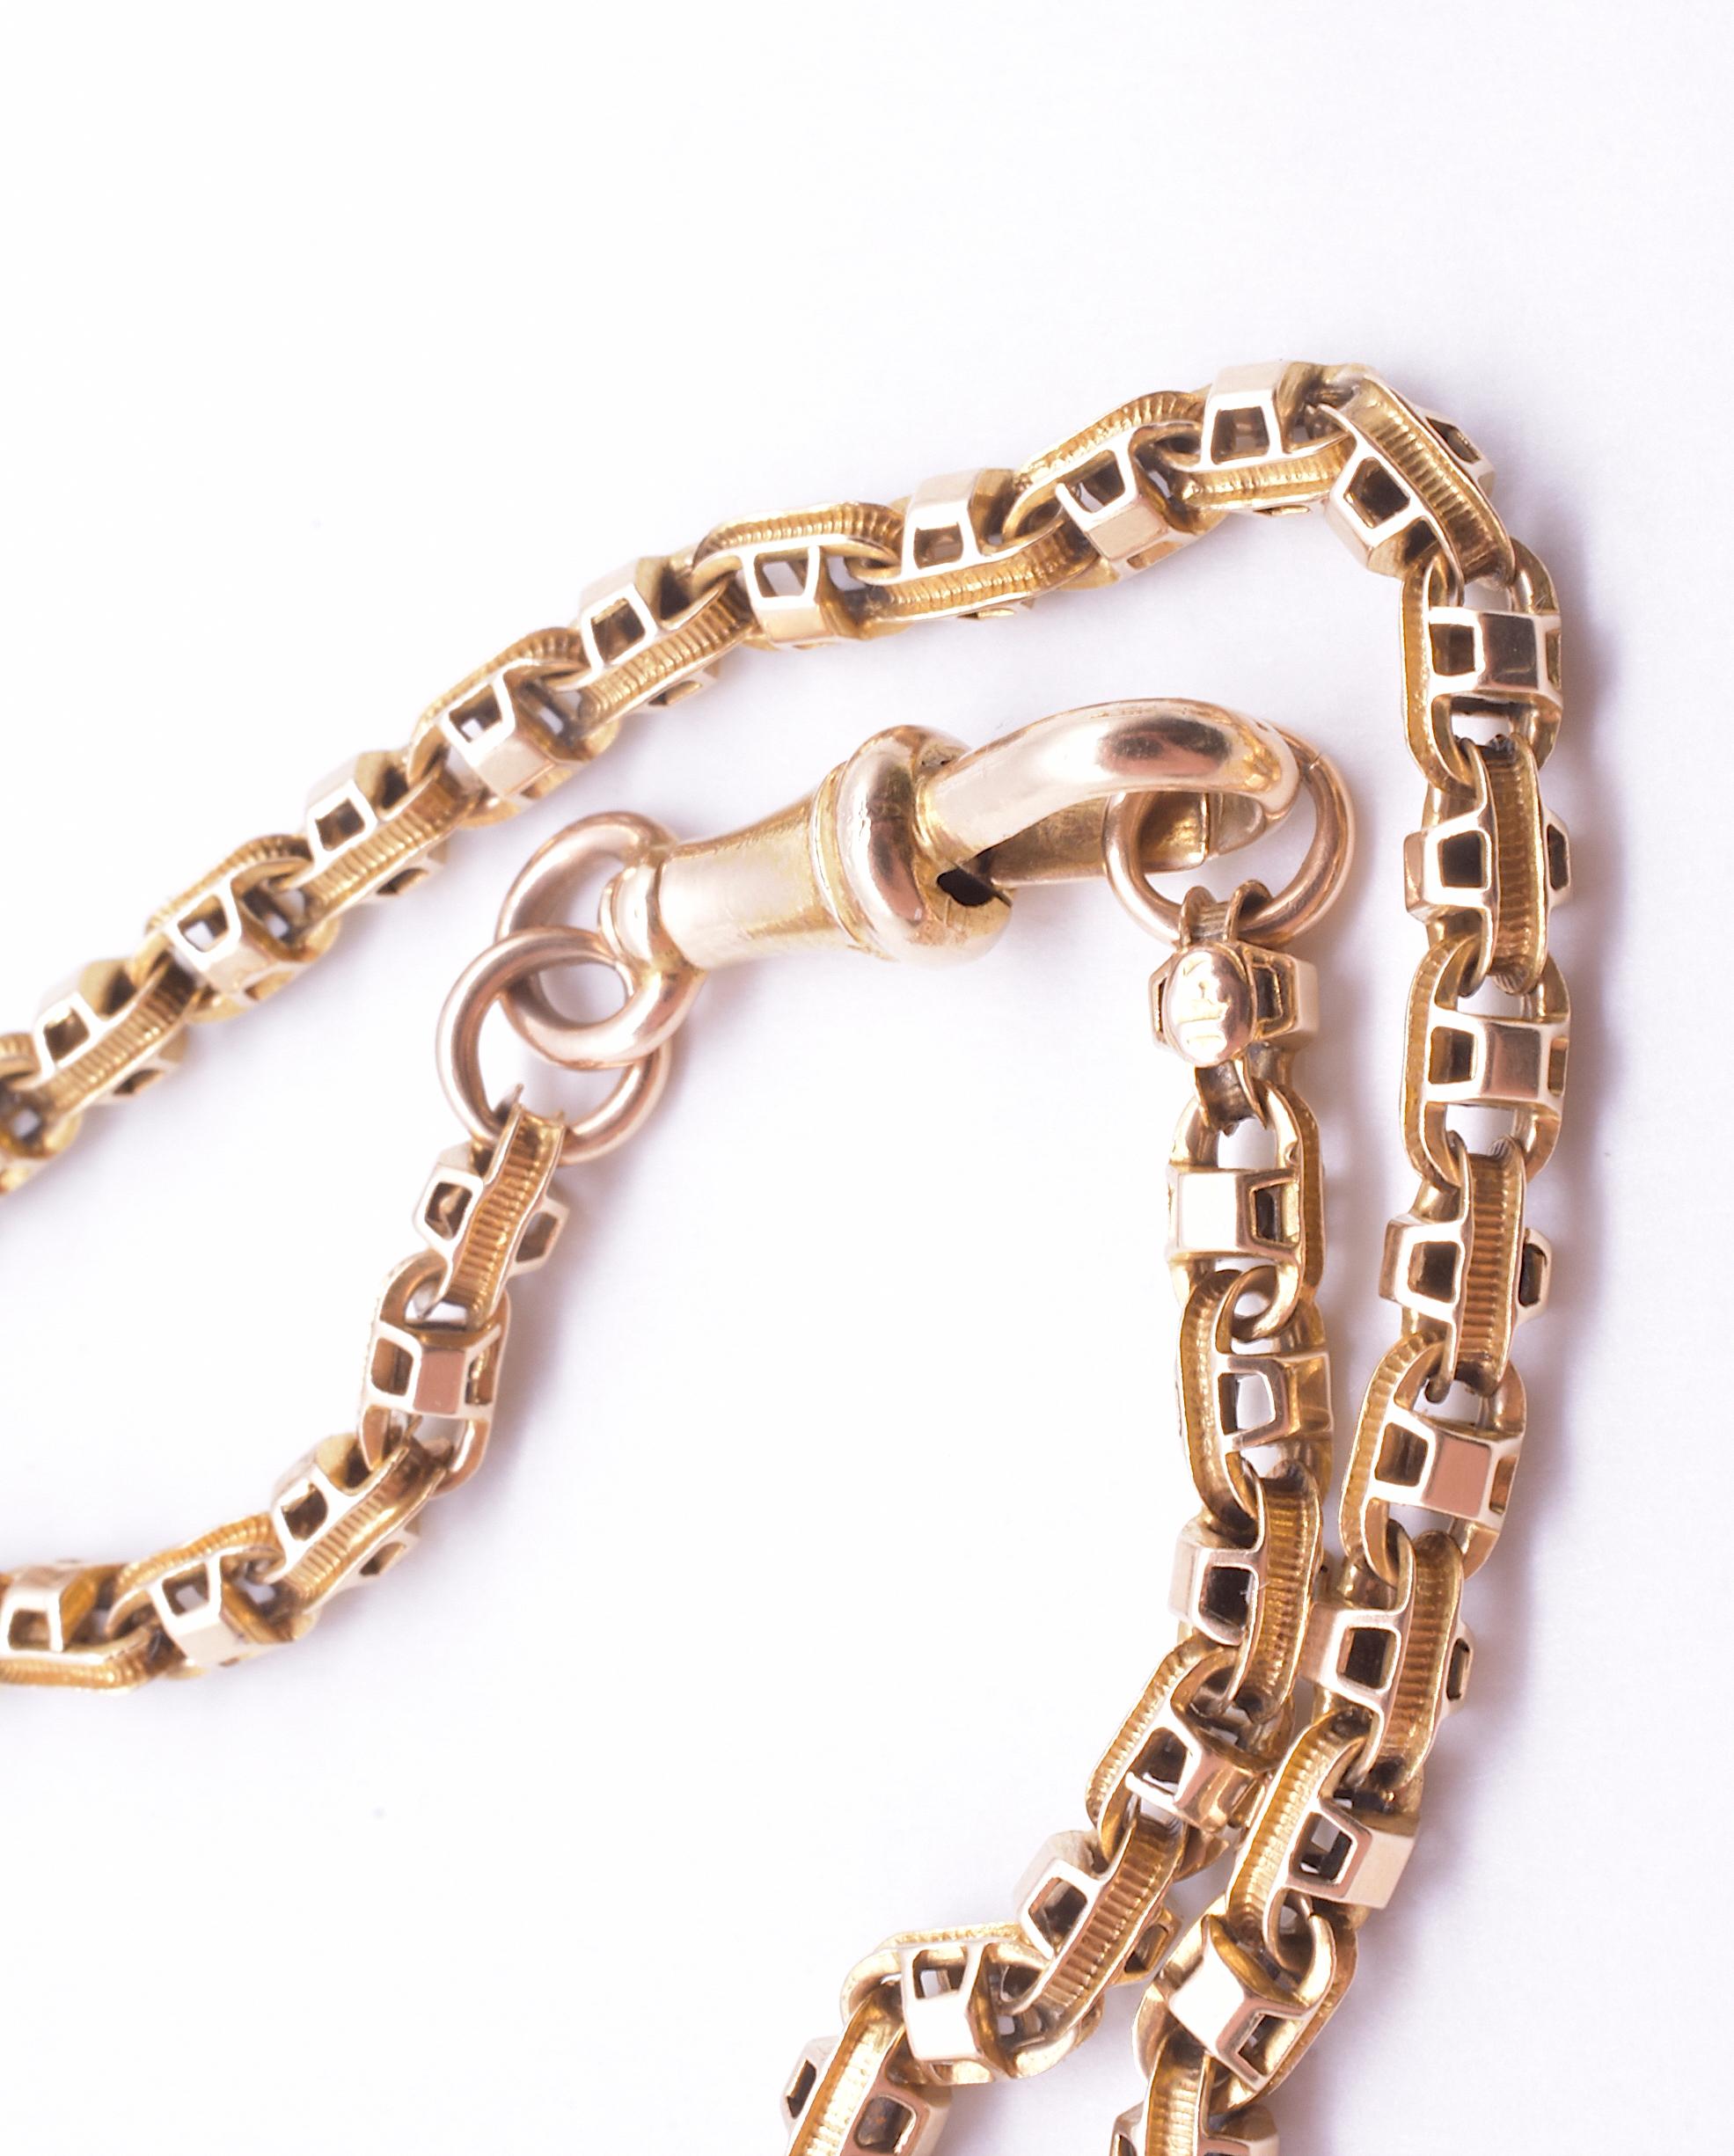 Known as a box link or Venetian chain, this 60 inch Victorian long guard watch chain is hand forged and was made by welding together hollow section rings. Great ingenuity went into the design and making of box link chains, as one can see from the